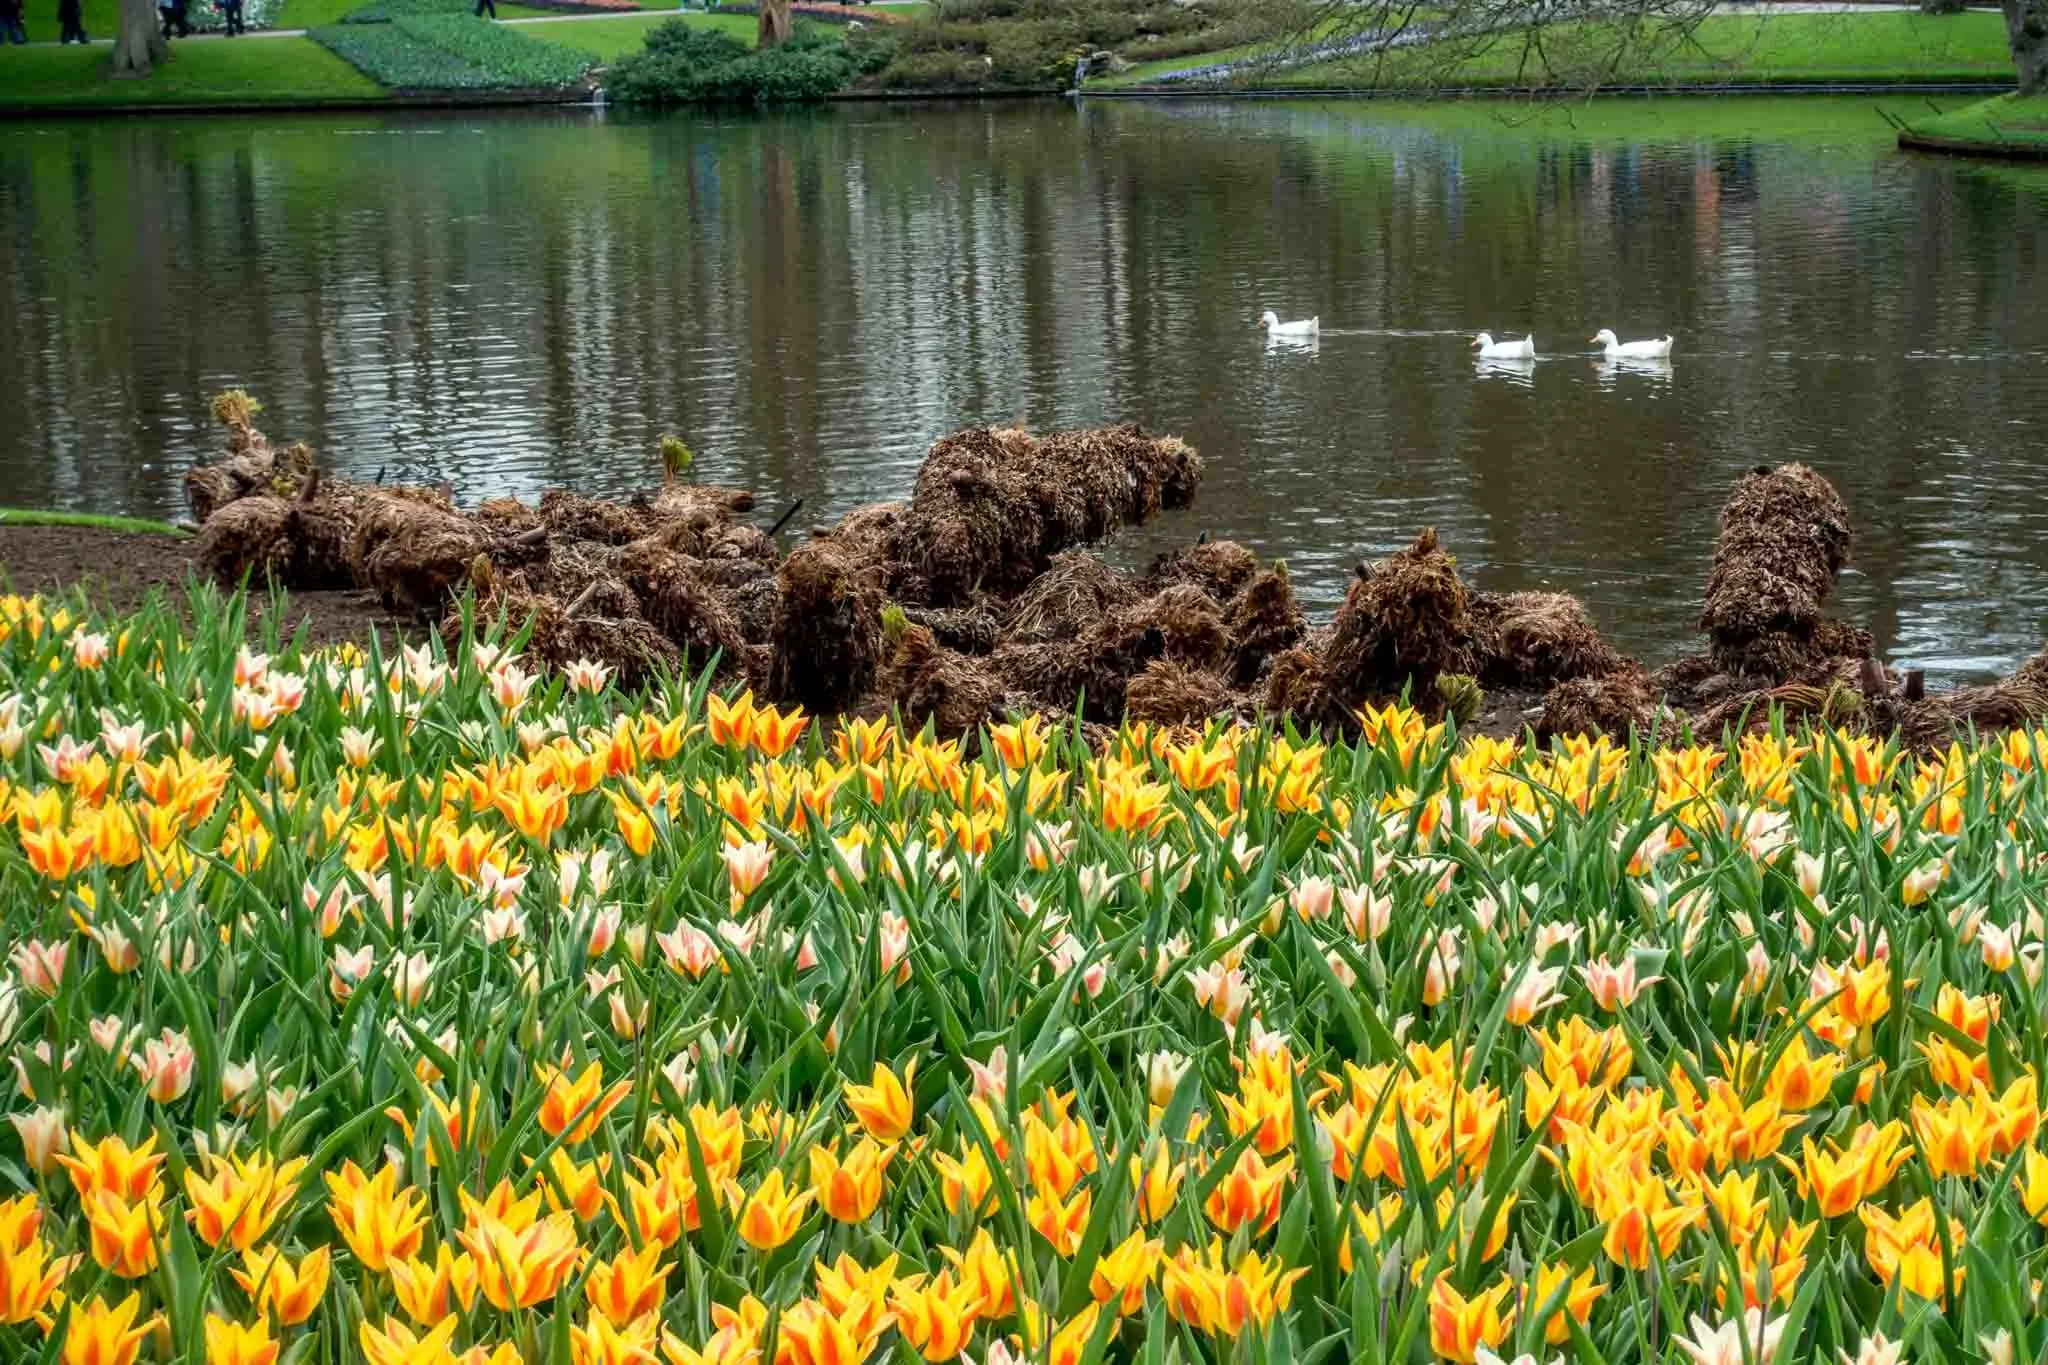 Tulips along a pond with ducks going by.